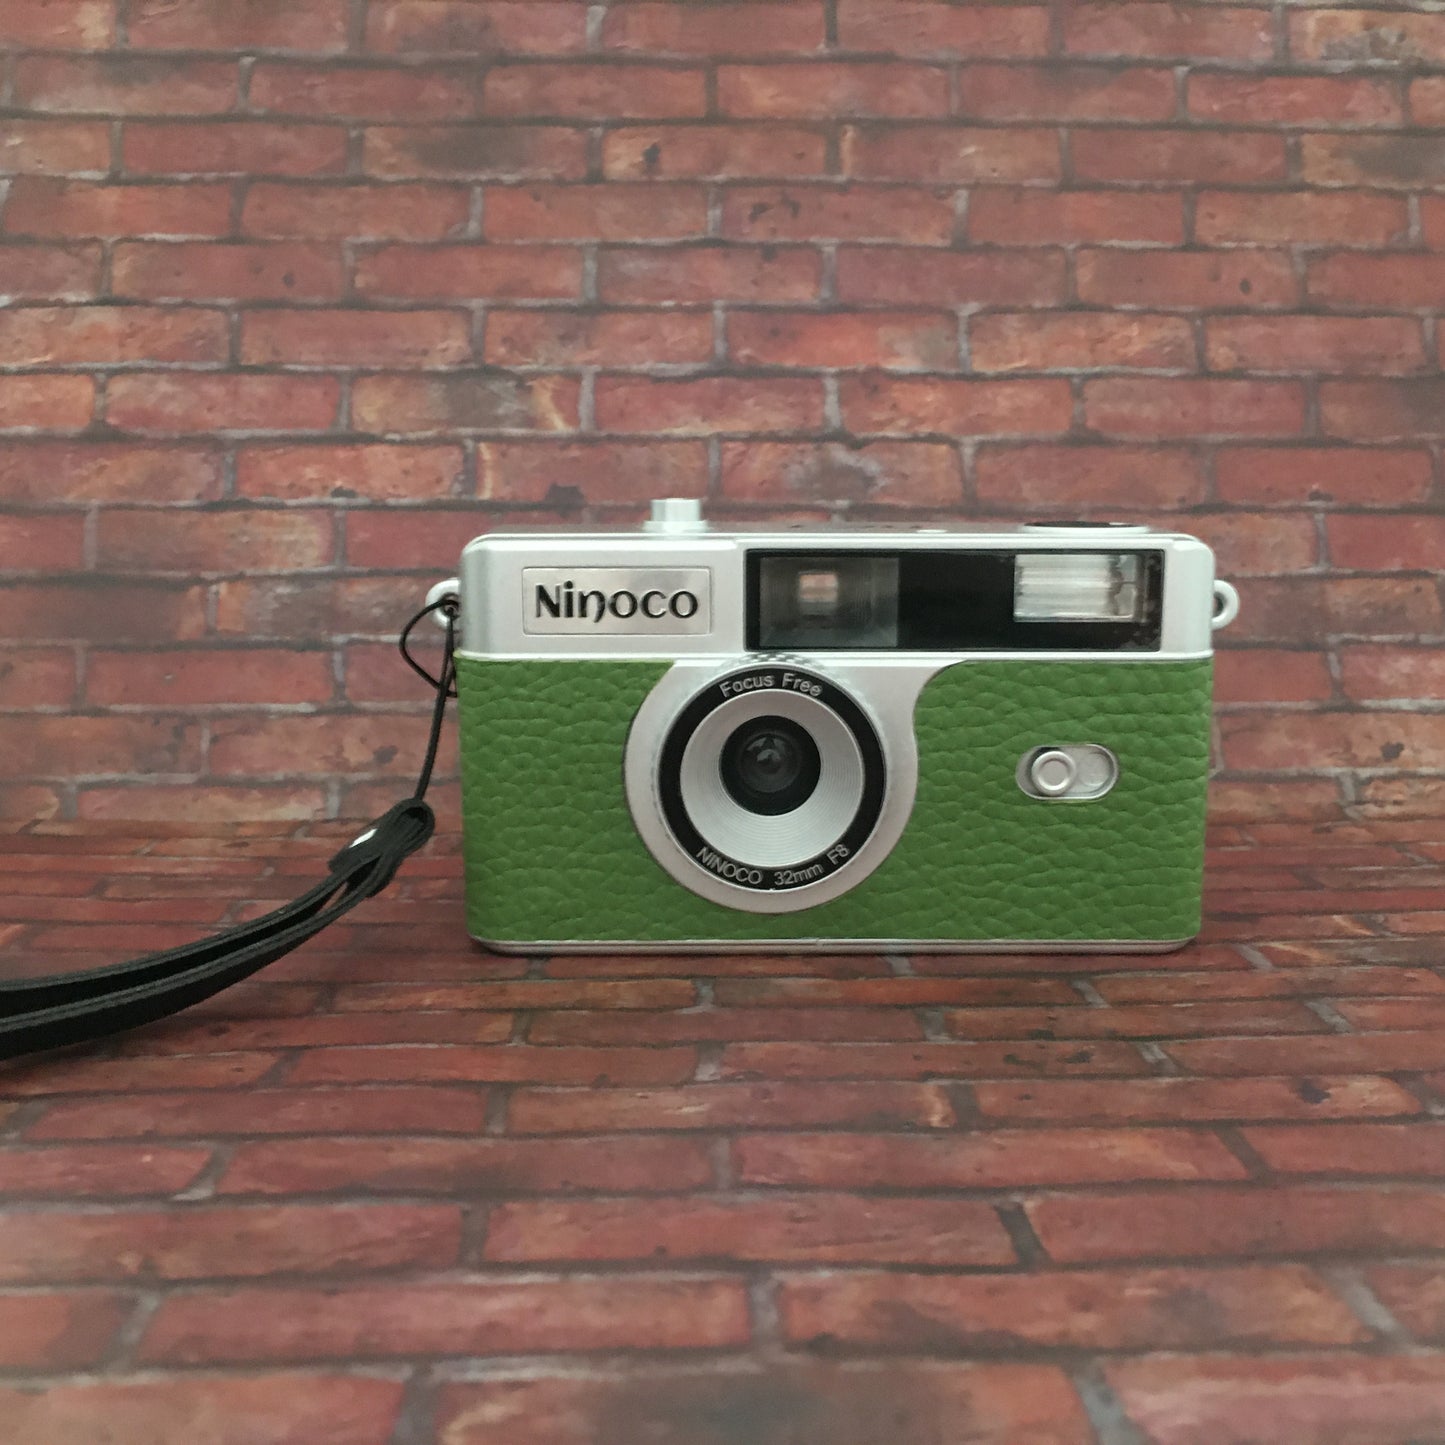 Point & shoot ! Brand new 35mm film camera with veggie green leather